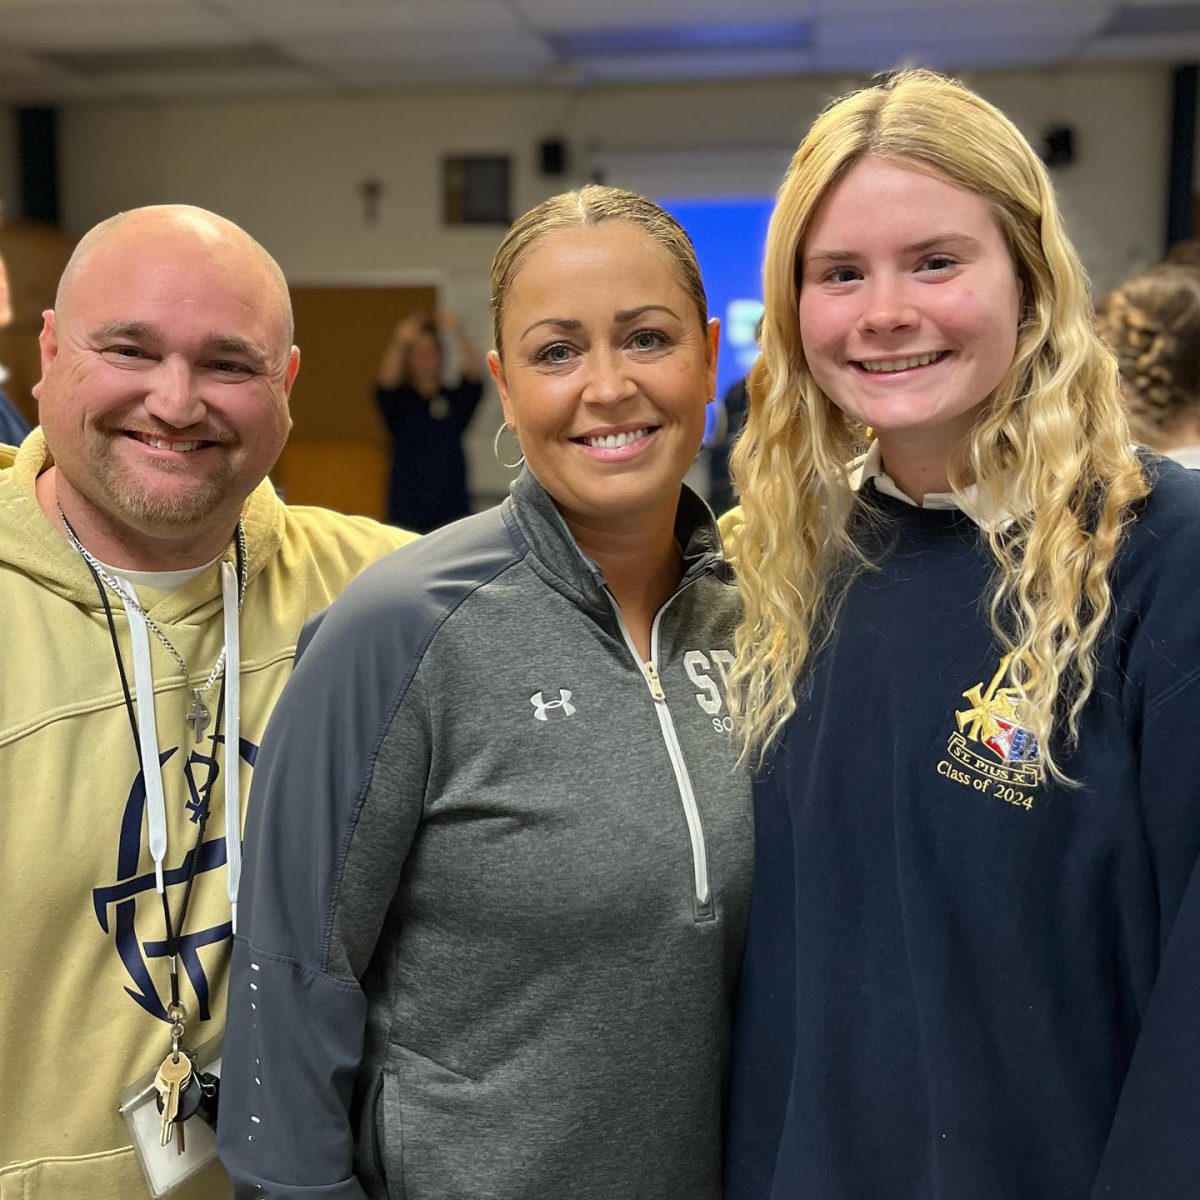 Senior brings CPR and AED certification to St. Pius X curriculum